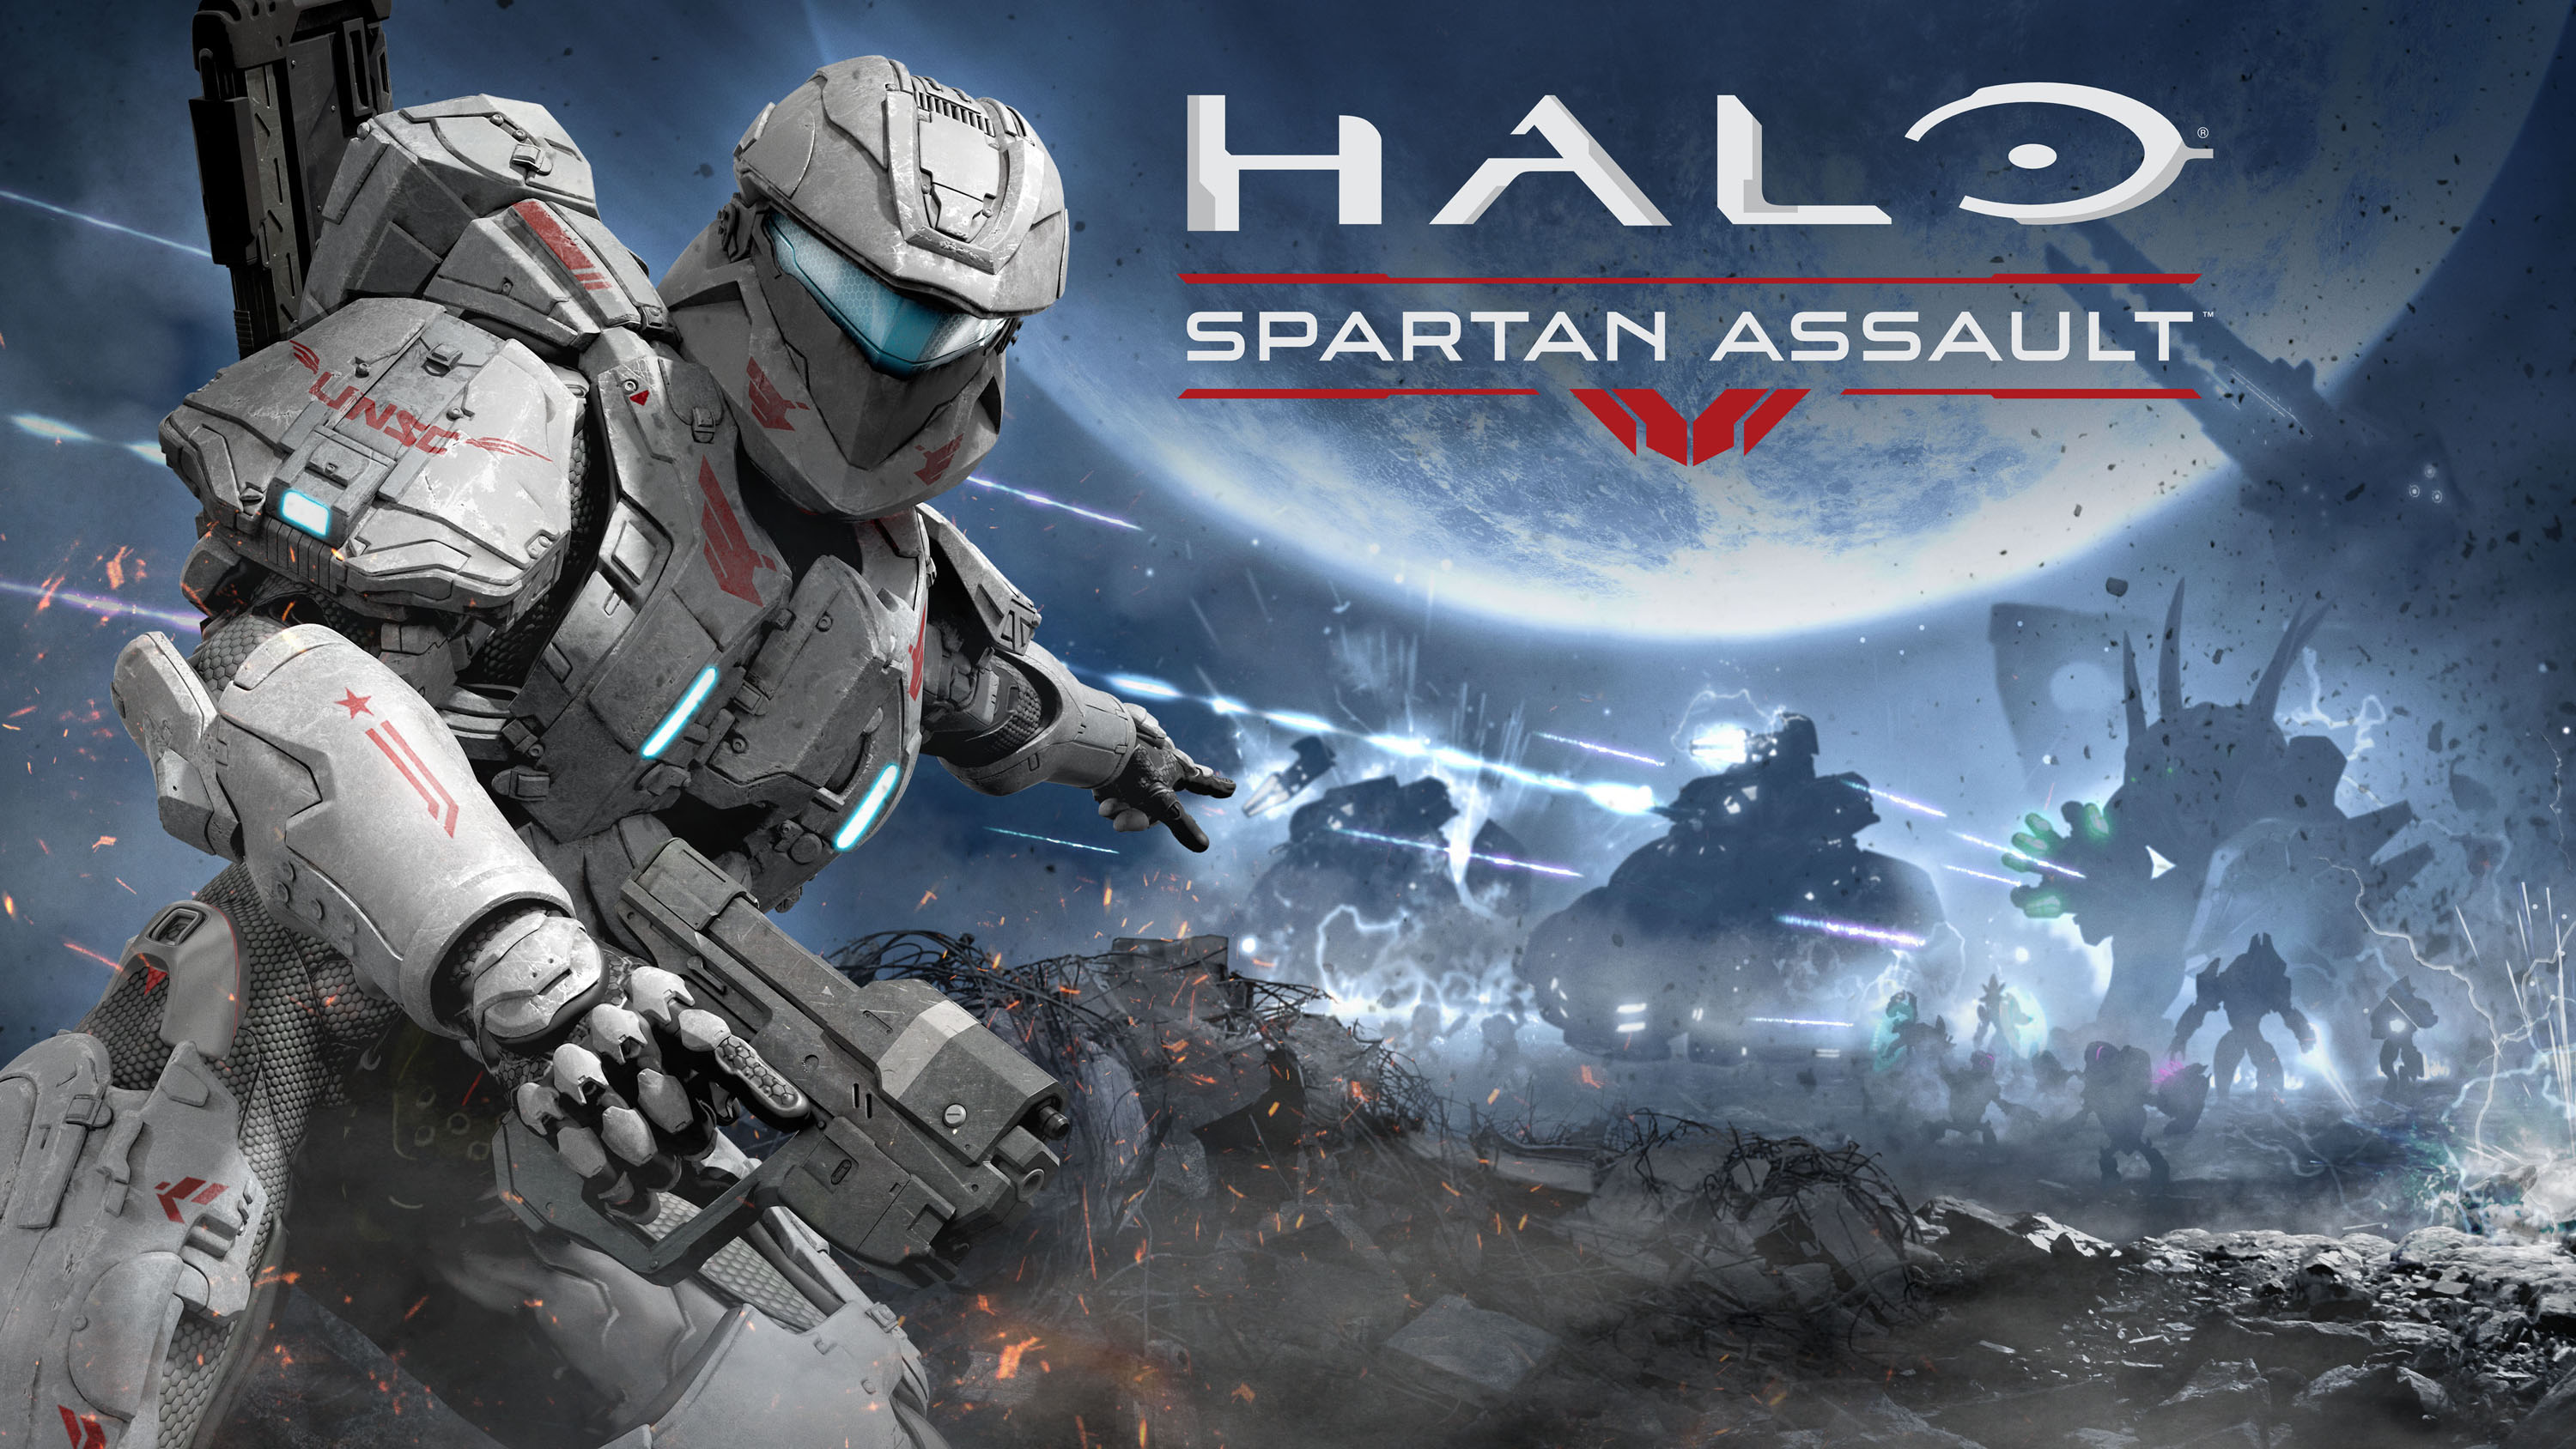 Halo: Spartan Assault Coming to Xbox One This Christmas Eve